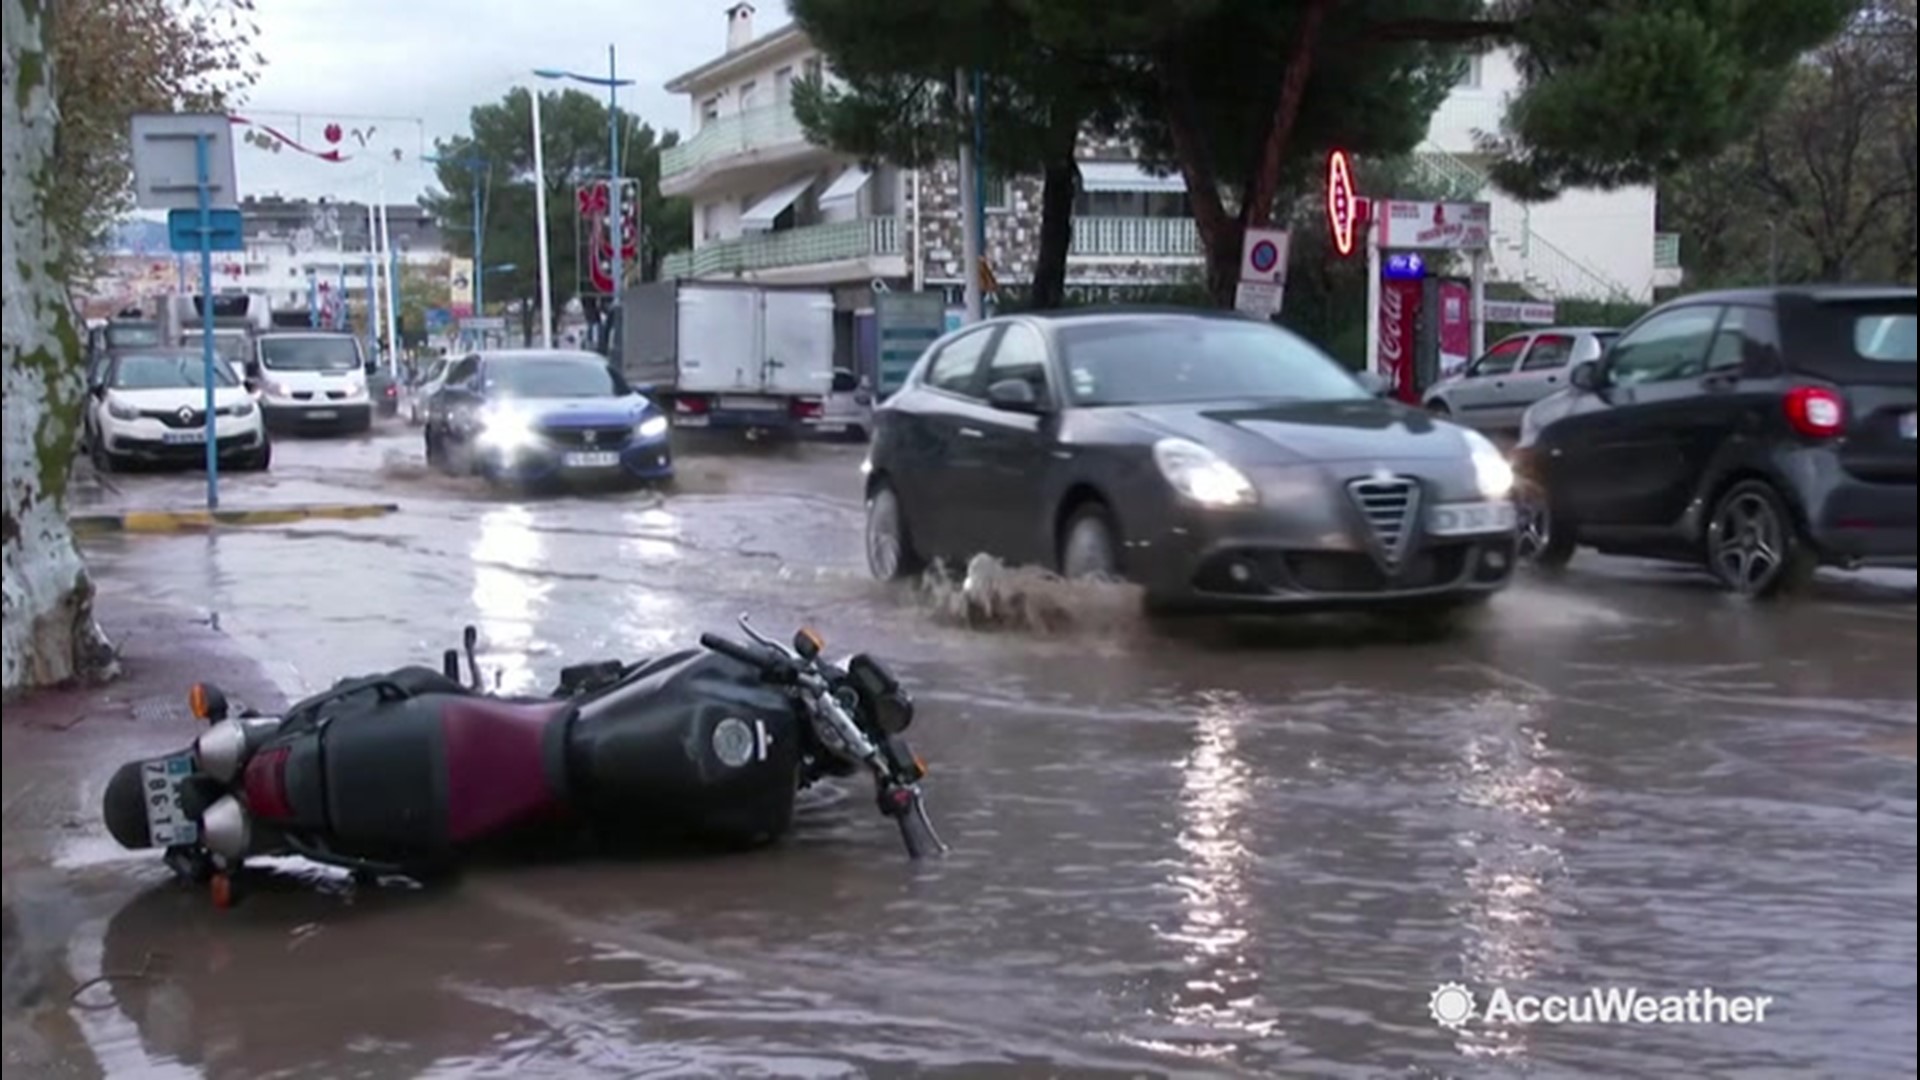 Heavy rain triggered damaging flooding in Mandelieu-la-Napole, France, submerging streets in water and mud and filling shops and homes with water on Dec. 2.